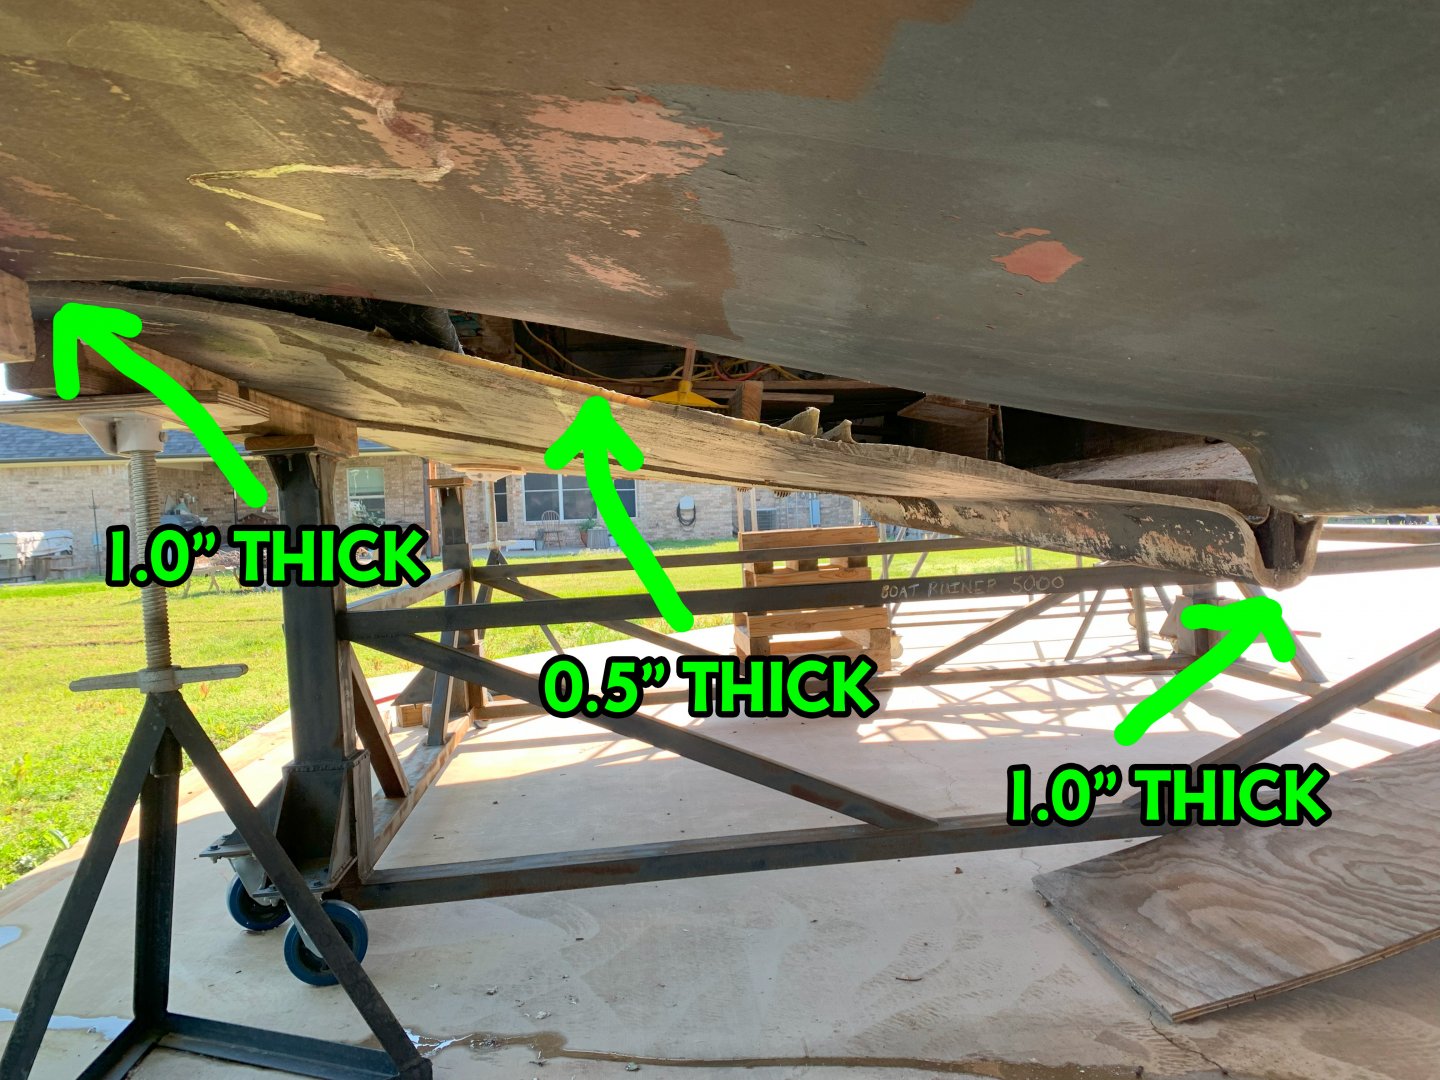 hull thickness picture.jpg